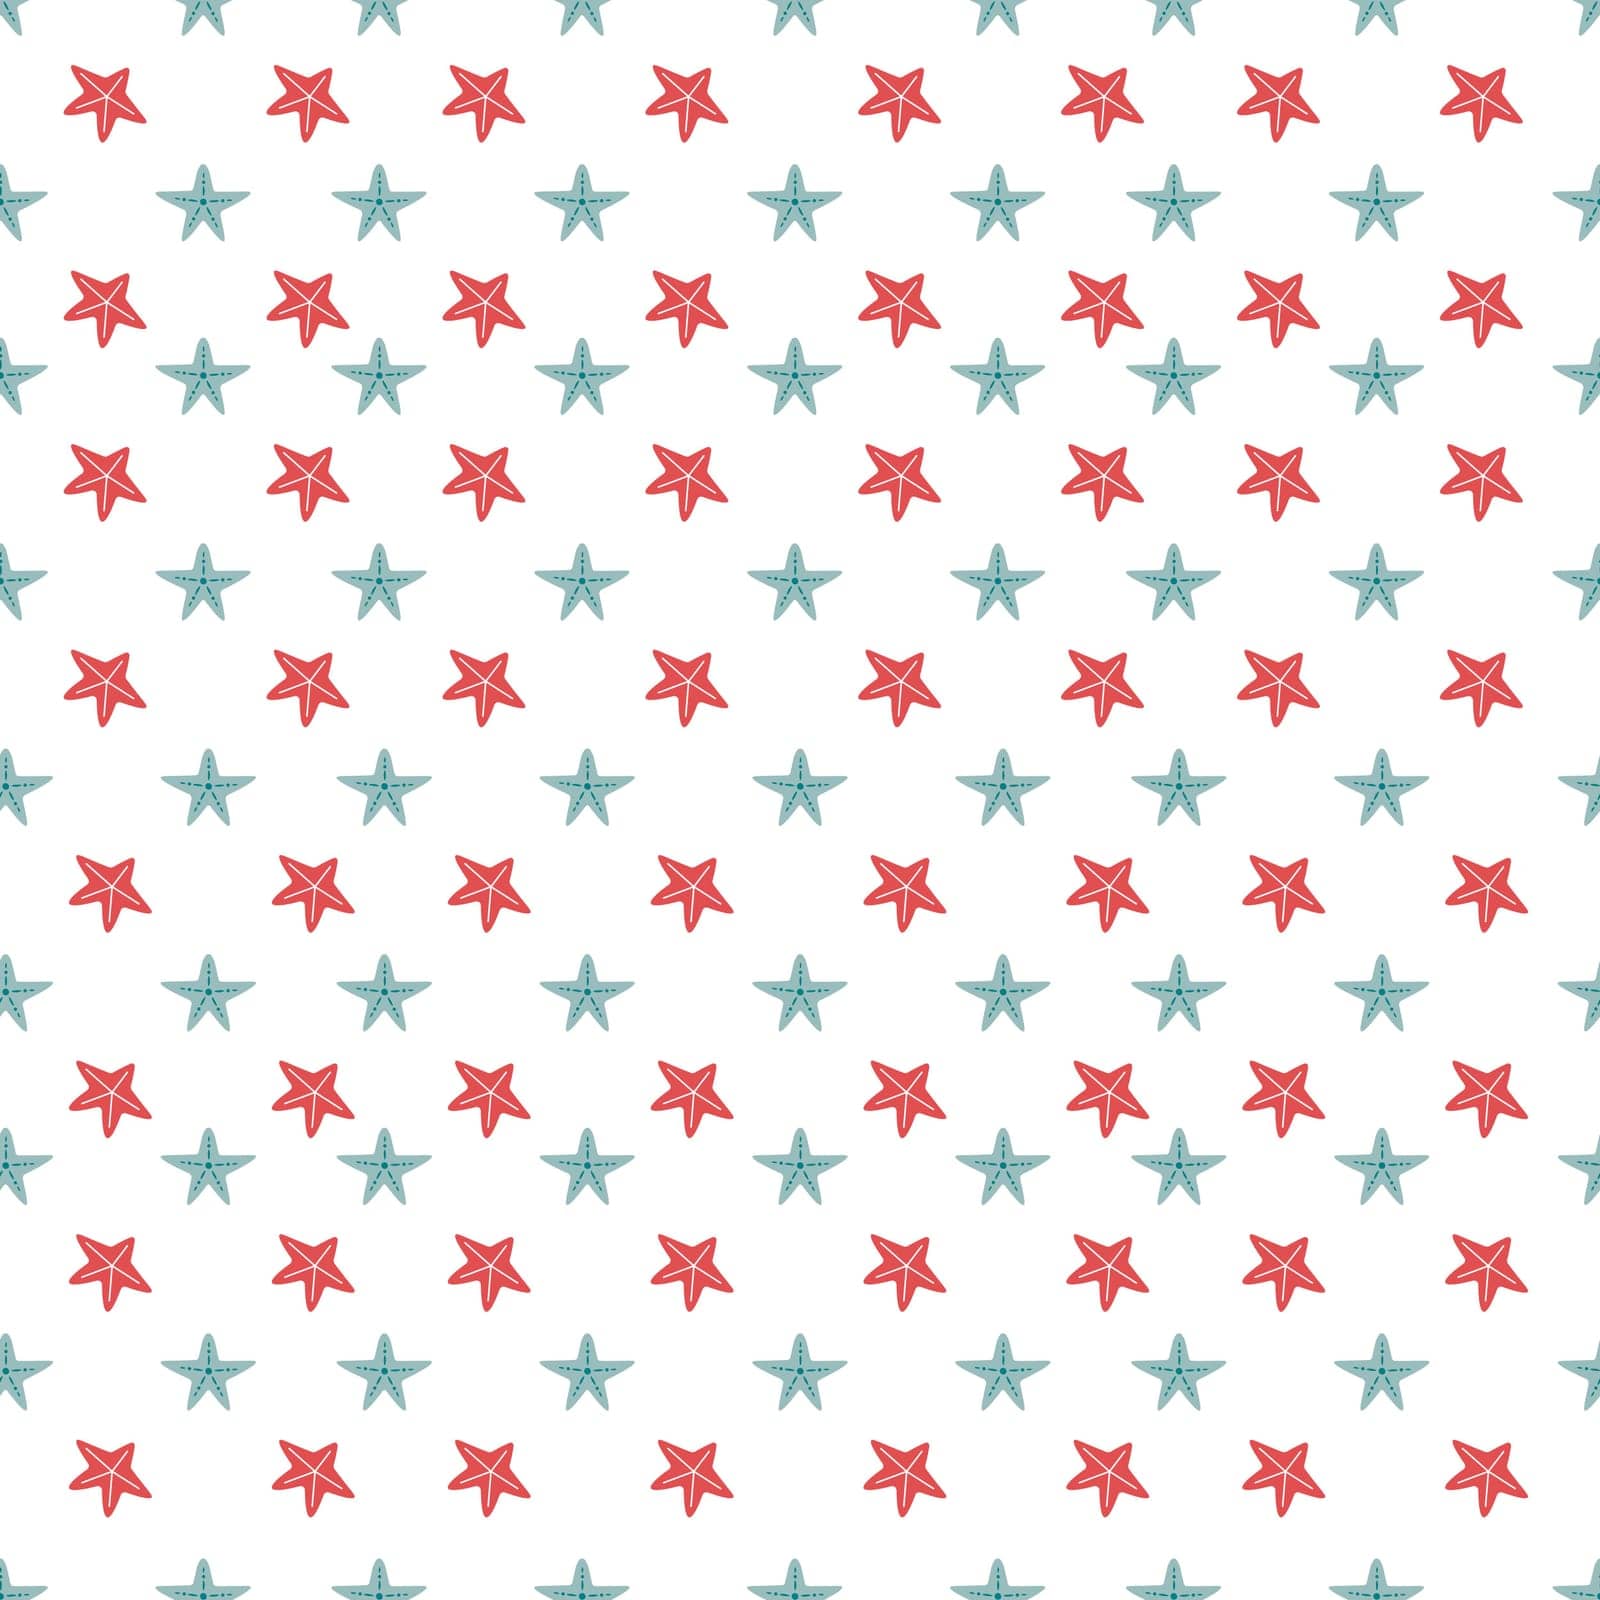 Trendy design with stars in rows, isolated wallpaper or wrapping paper. Shimmering and glittering shapes. Holiday preparation celebration. Seamless pattern background or print. Vector in flat style